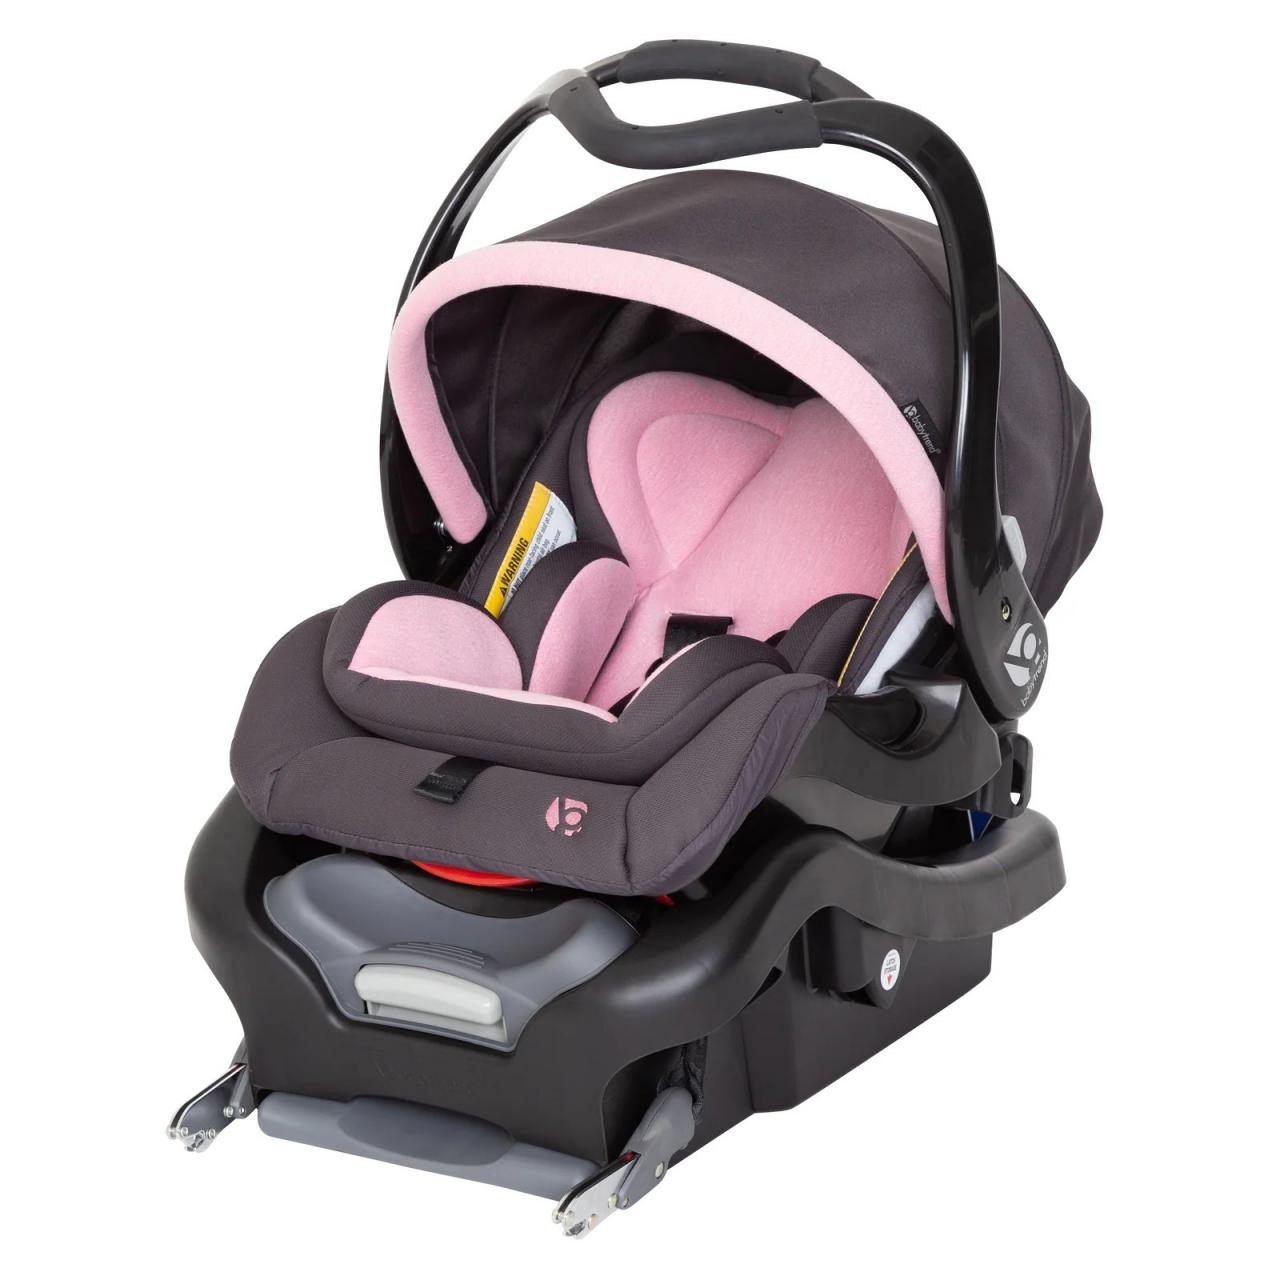 Expert Guide, Installing Your Baby Trend Car Seat Safely and Correctly